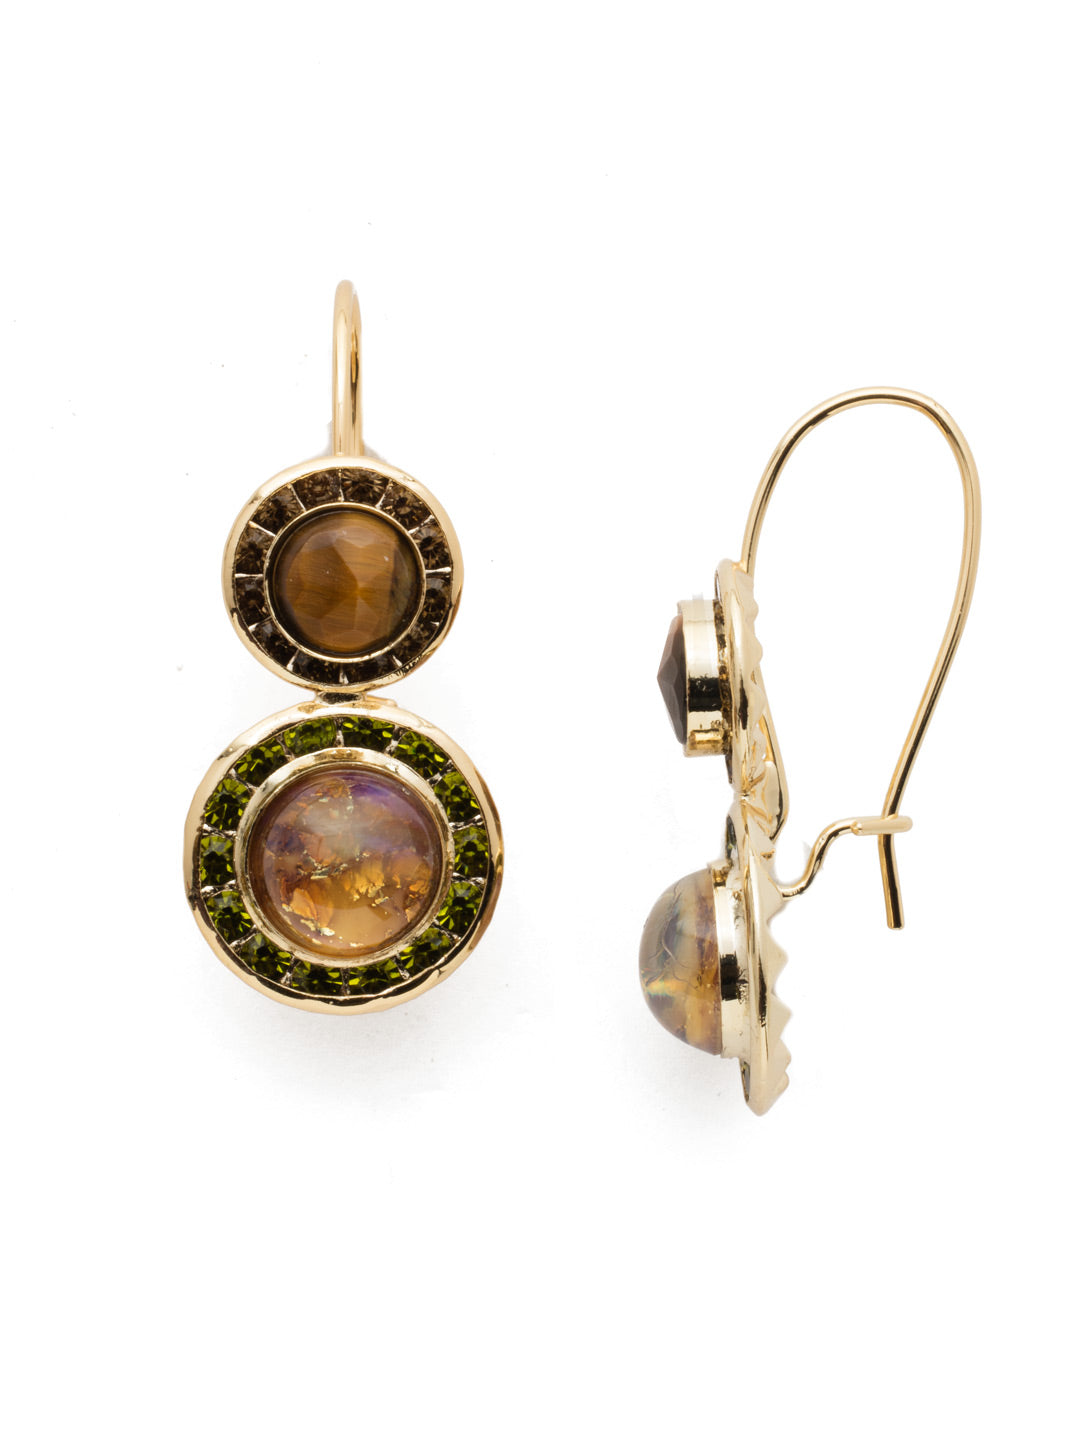 Hartford Dangle Earrings - EET13BGCSM - The Hartford Dangle Earrings double the fun with two drops of circular stones rimmed in super sparkly crystals. They're the perfect pair to wear anywhere. From Sorrelli's Cashmere collection in our Bright Gold-tone finish.